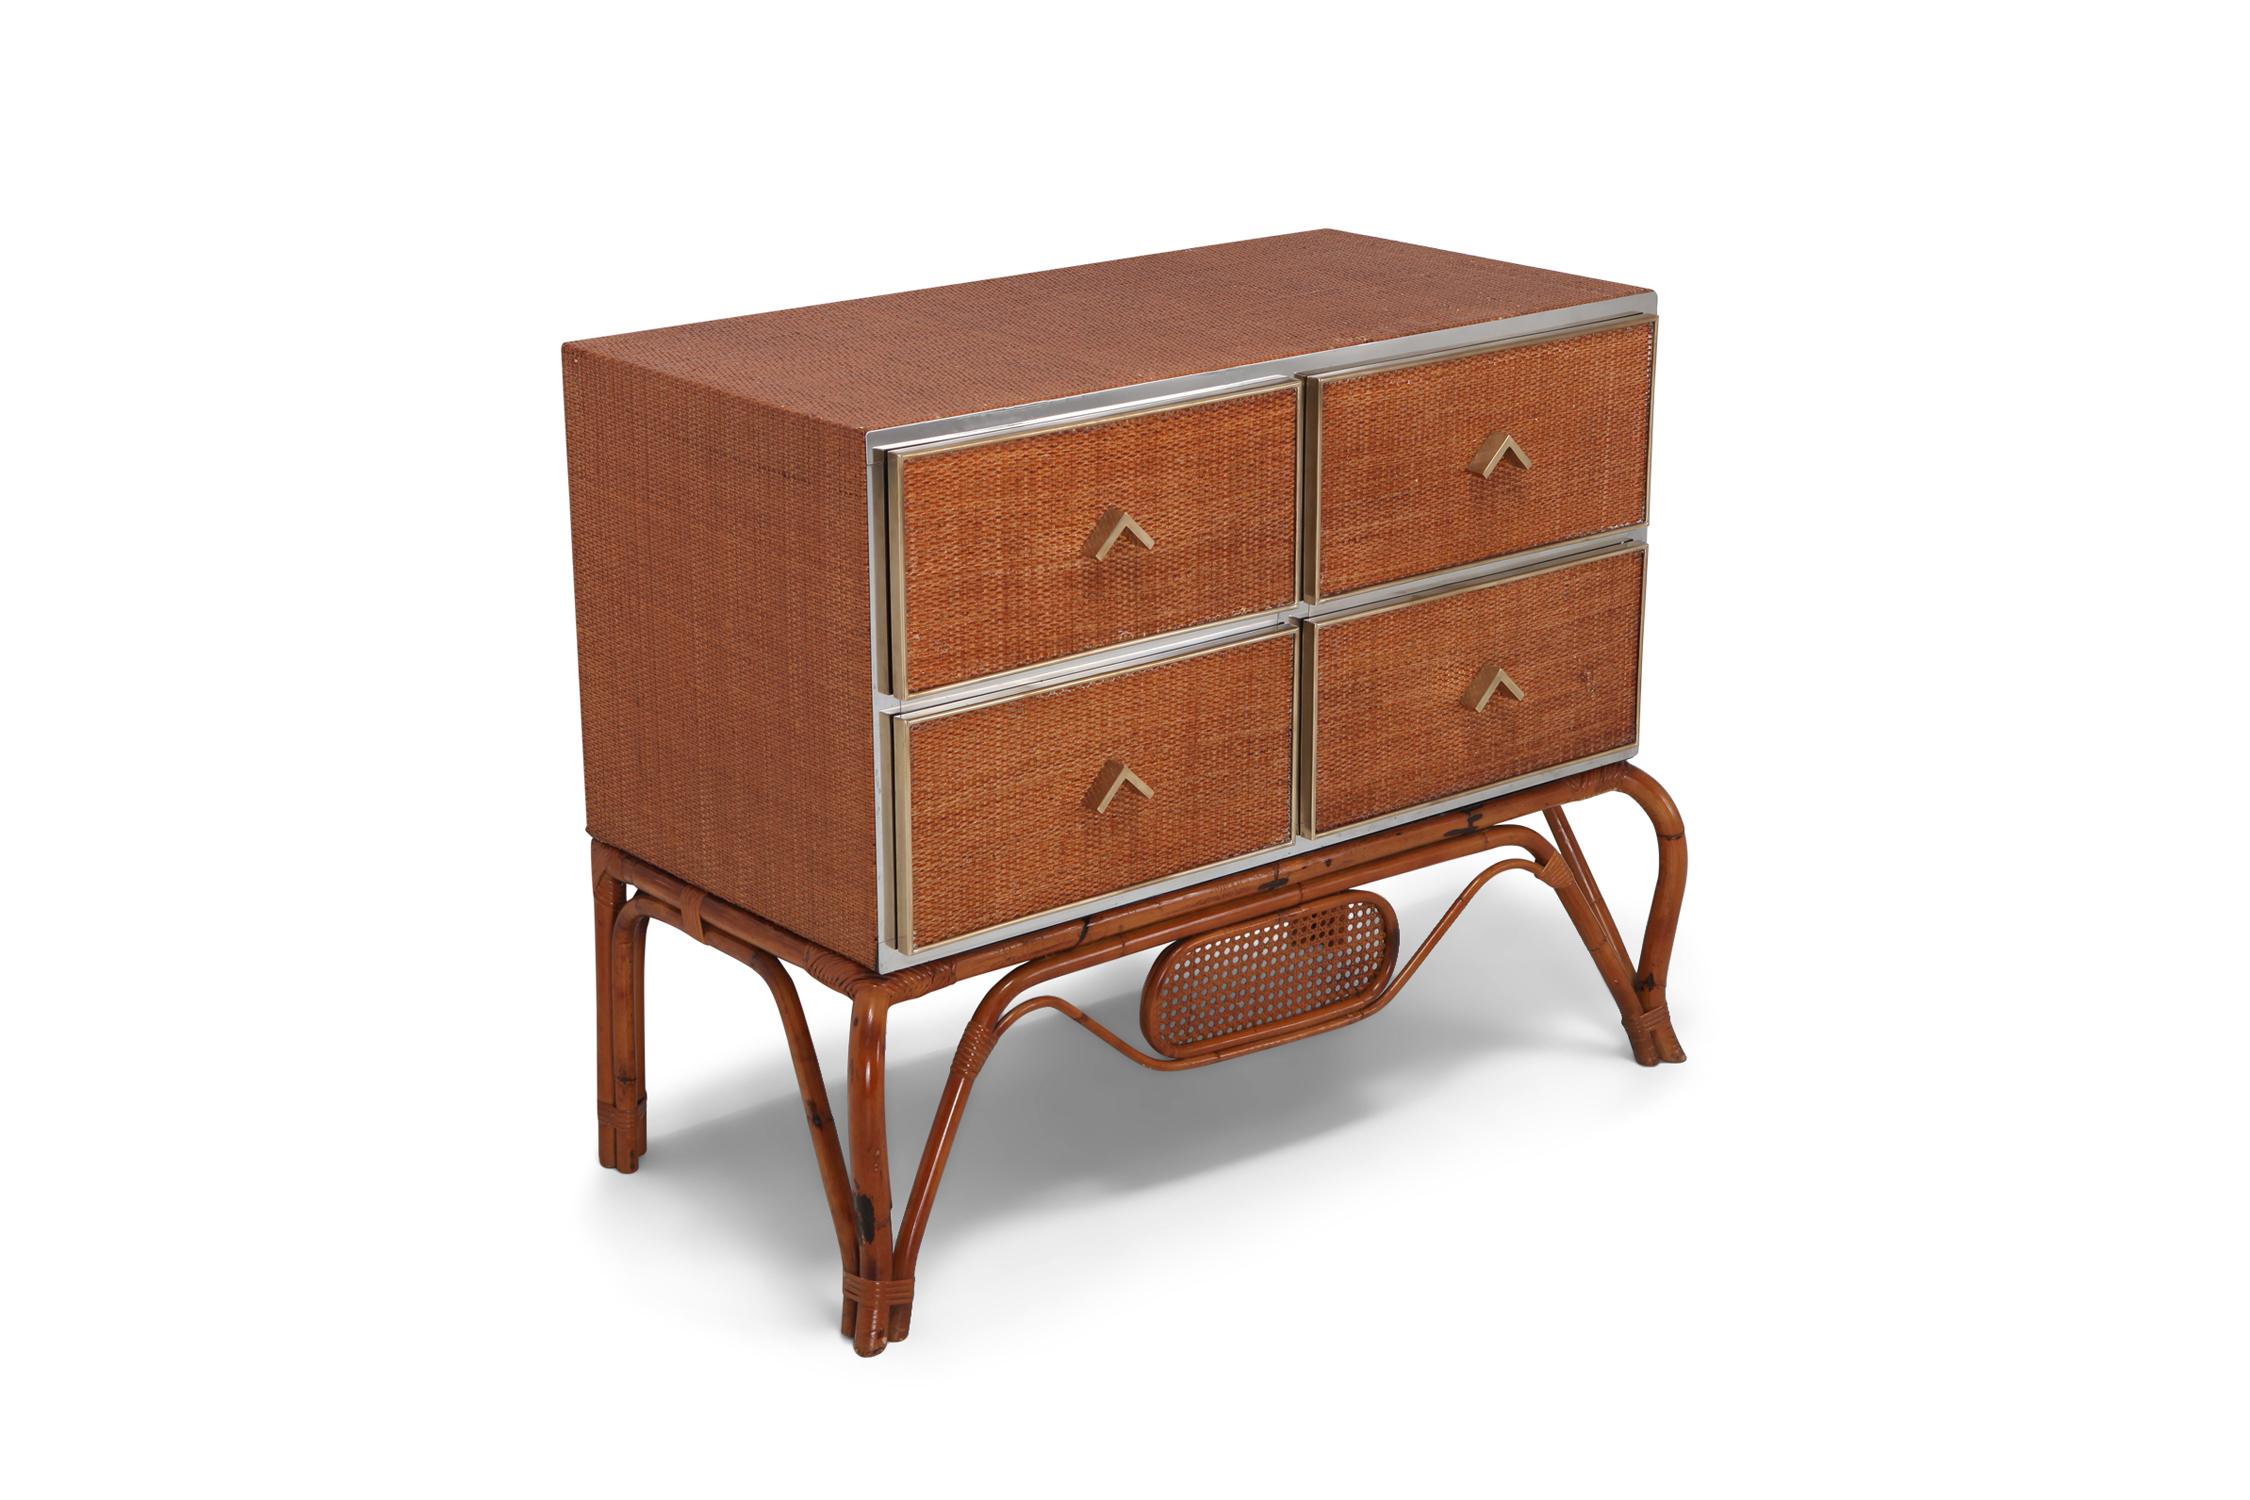 Eclectic chest of drawers made in a variety of 1970s chic materials like bamboo, rattan, brass and chrome.
An unusual combination that make this piece like no other.
Fits well in a new metropolitan Hollywood regency interior inspired by the